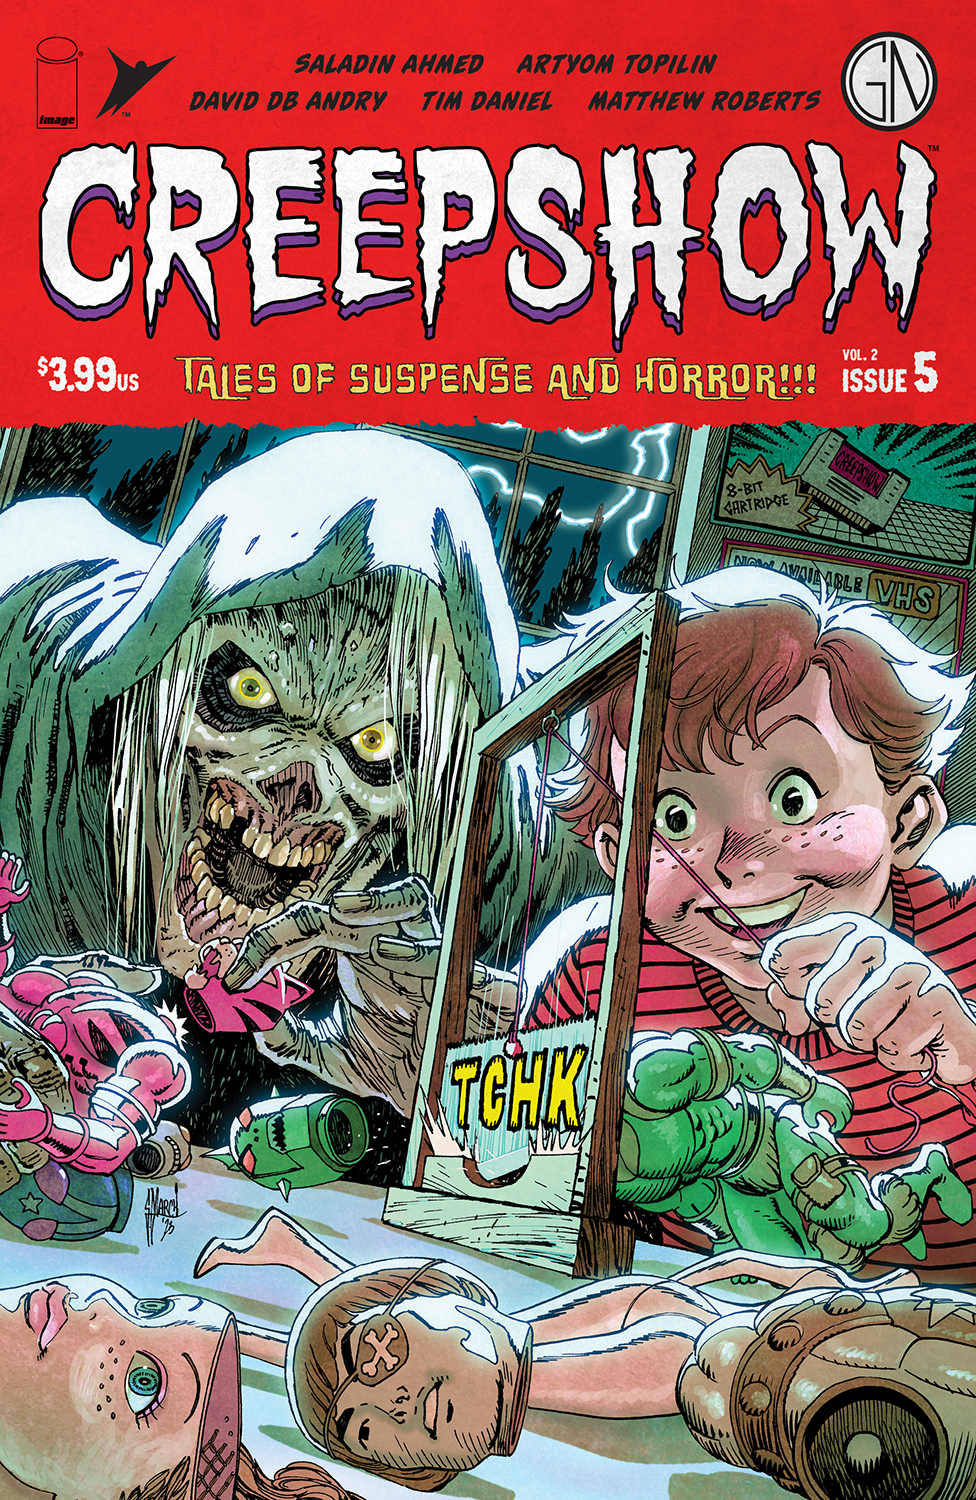 Creepshow Volume 2 #5 Cover A Guillem March (Of 5)